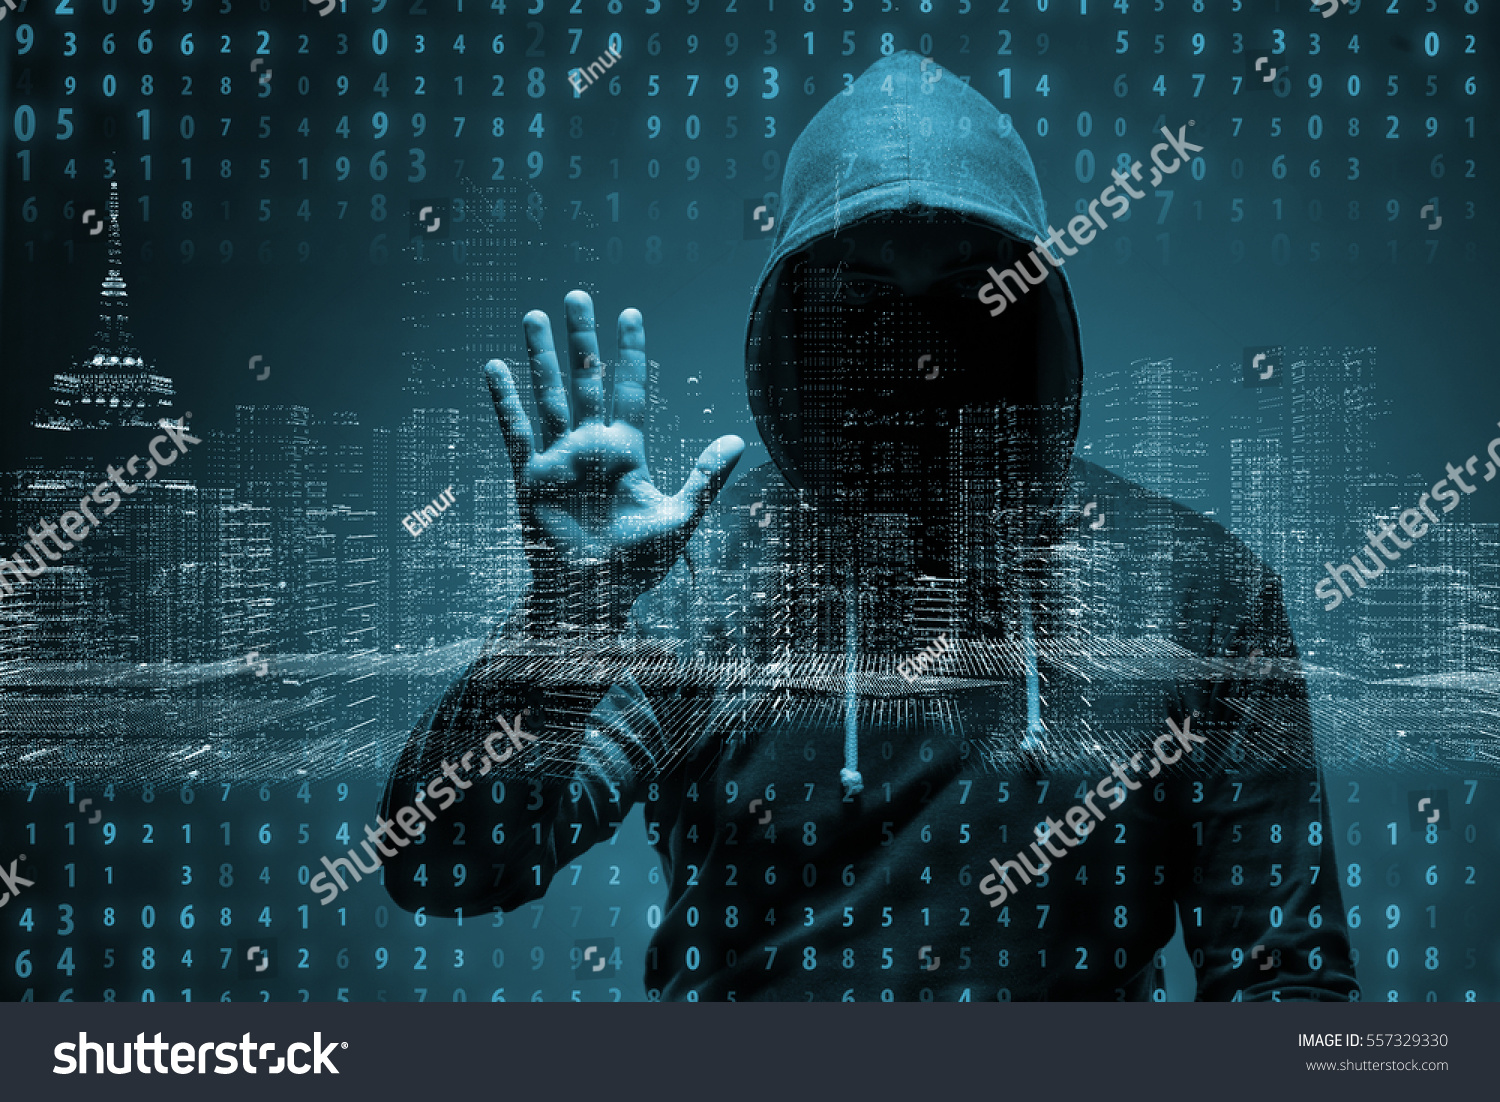 PowerPoint Template cyber crime young hacker in (mmokjukkh)